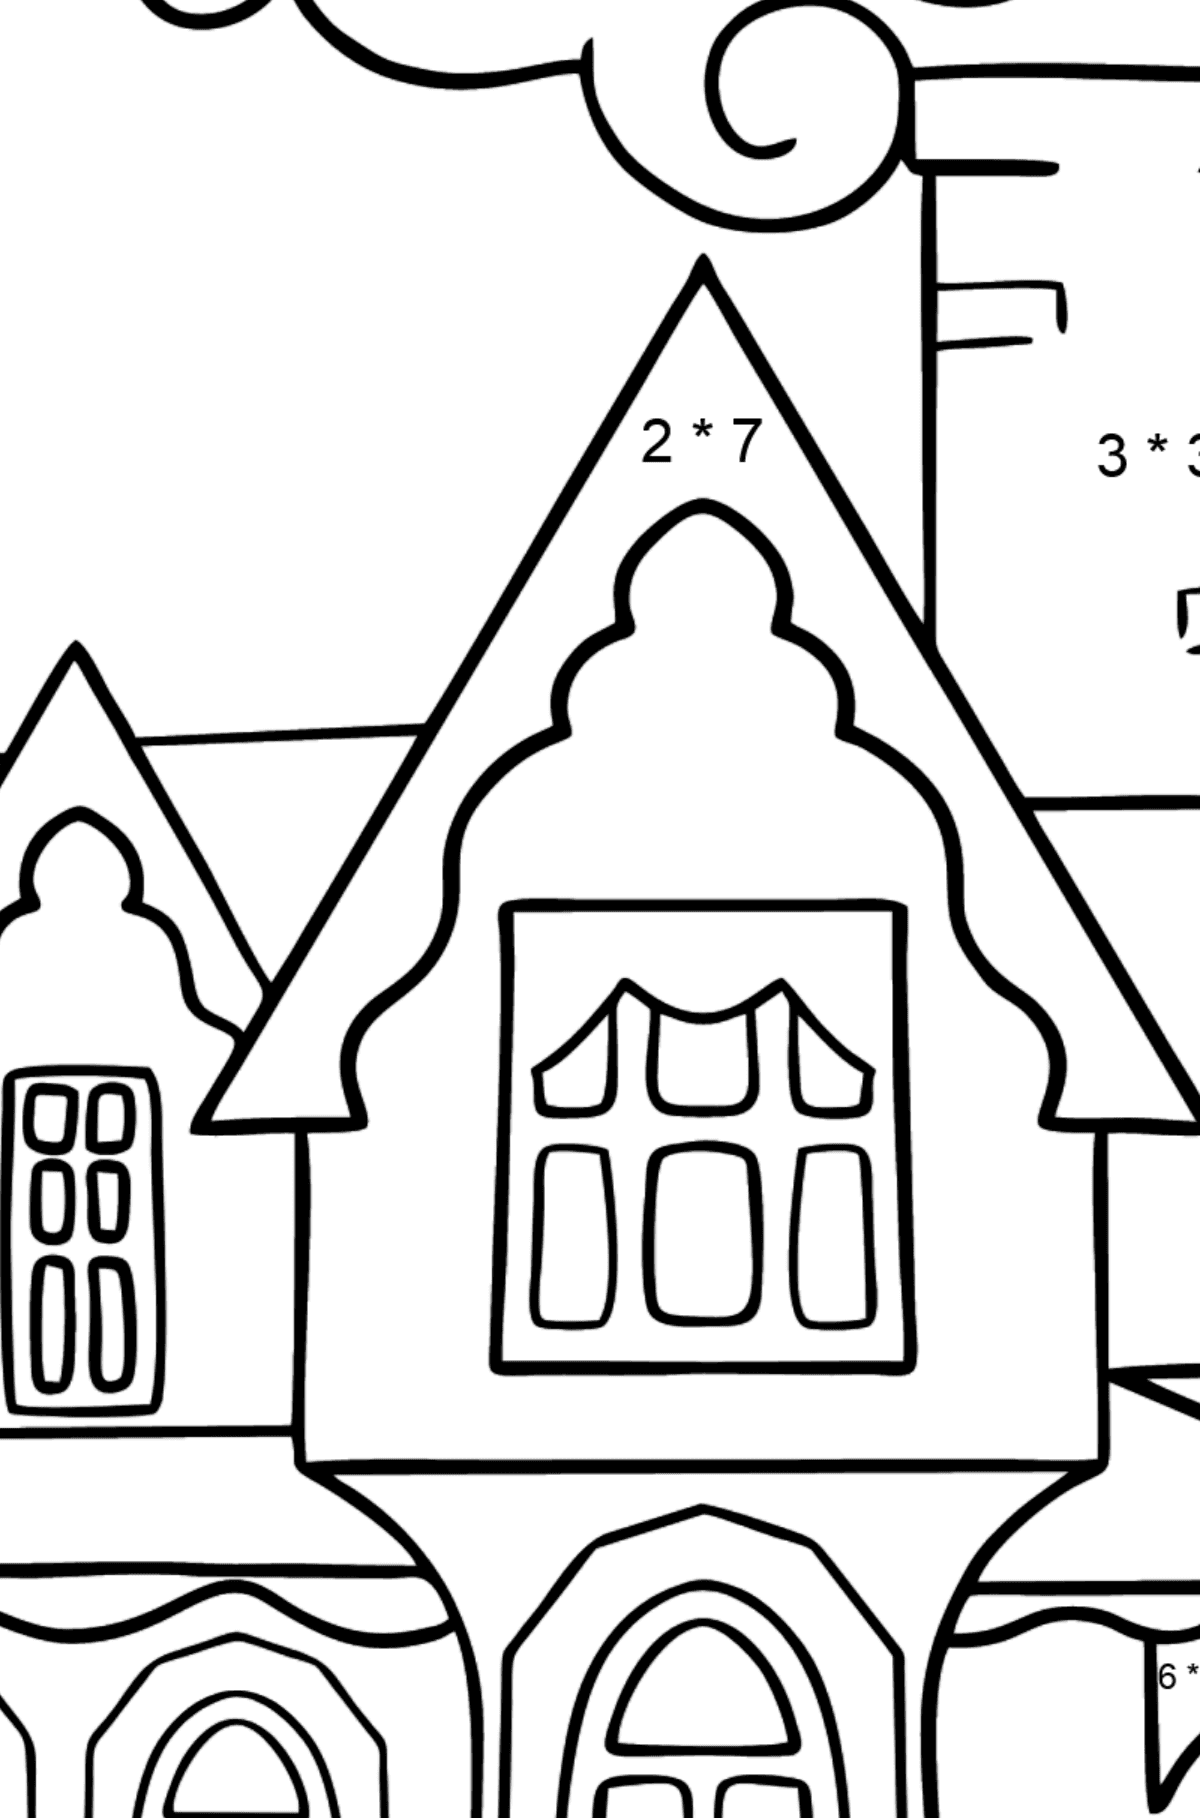 Simple Coloring Page - A Miraculous House - Math Coloring - Multiplication for Kids